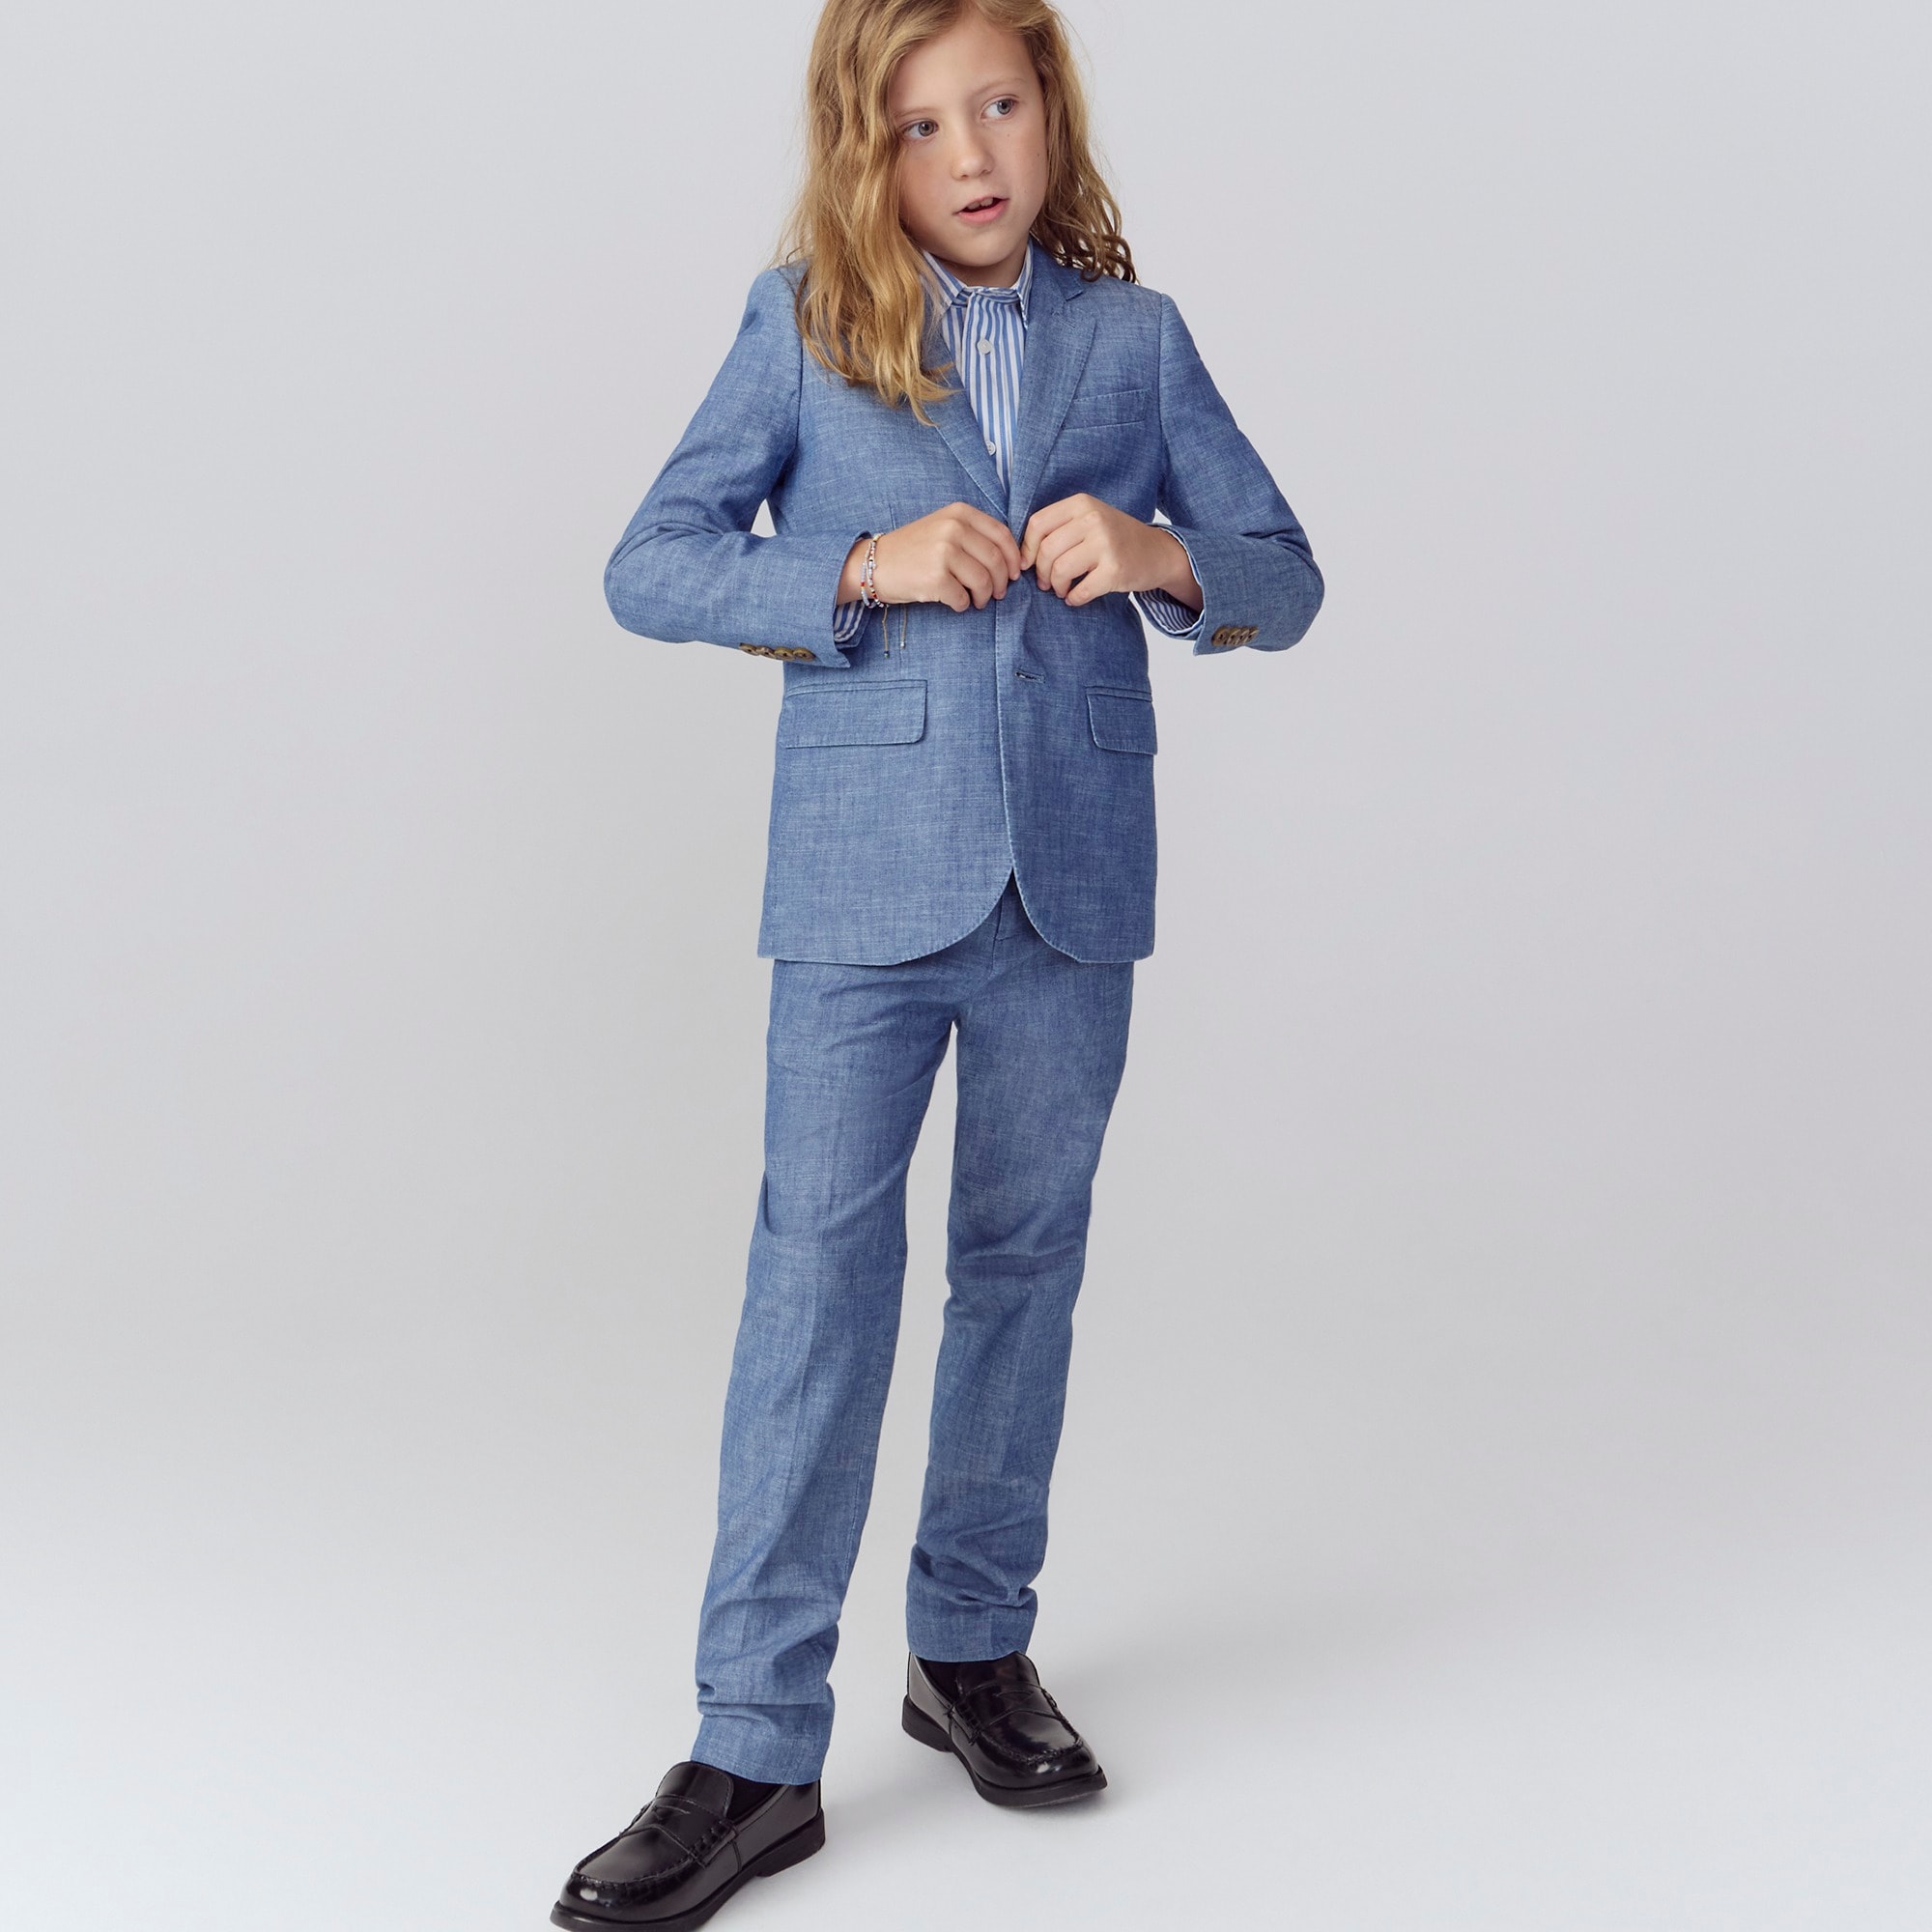 boys Boys' Ludlow suit pant in chambray